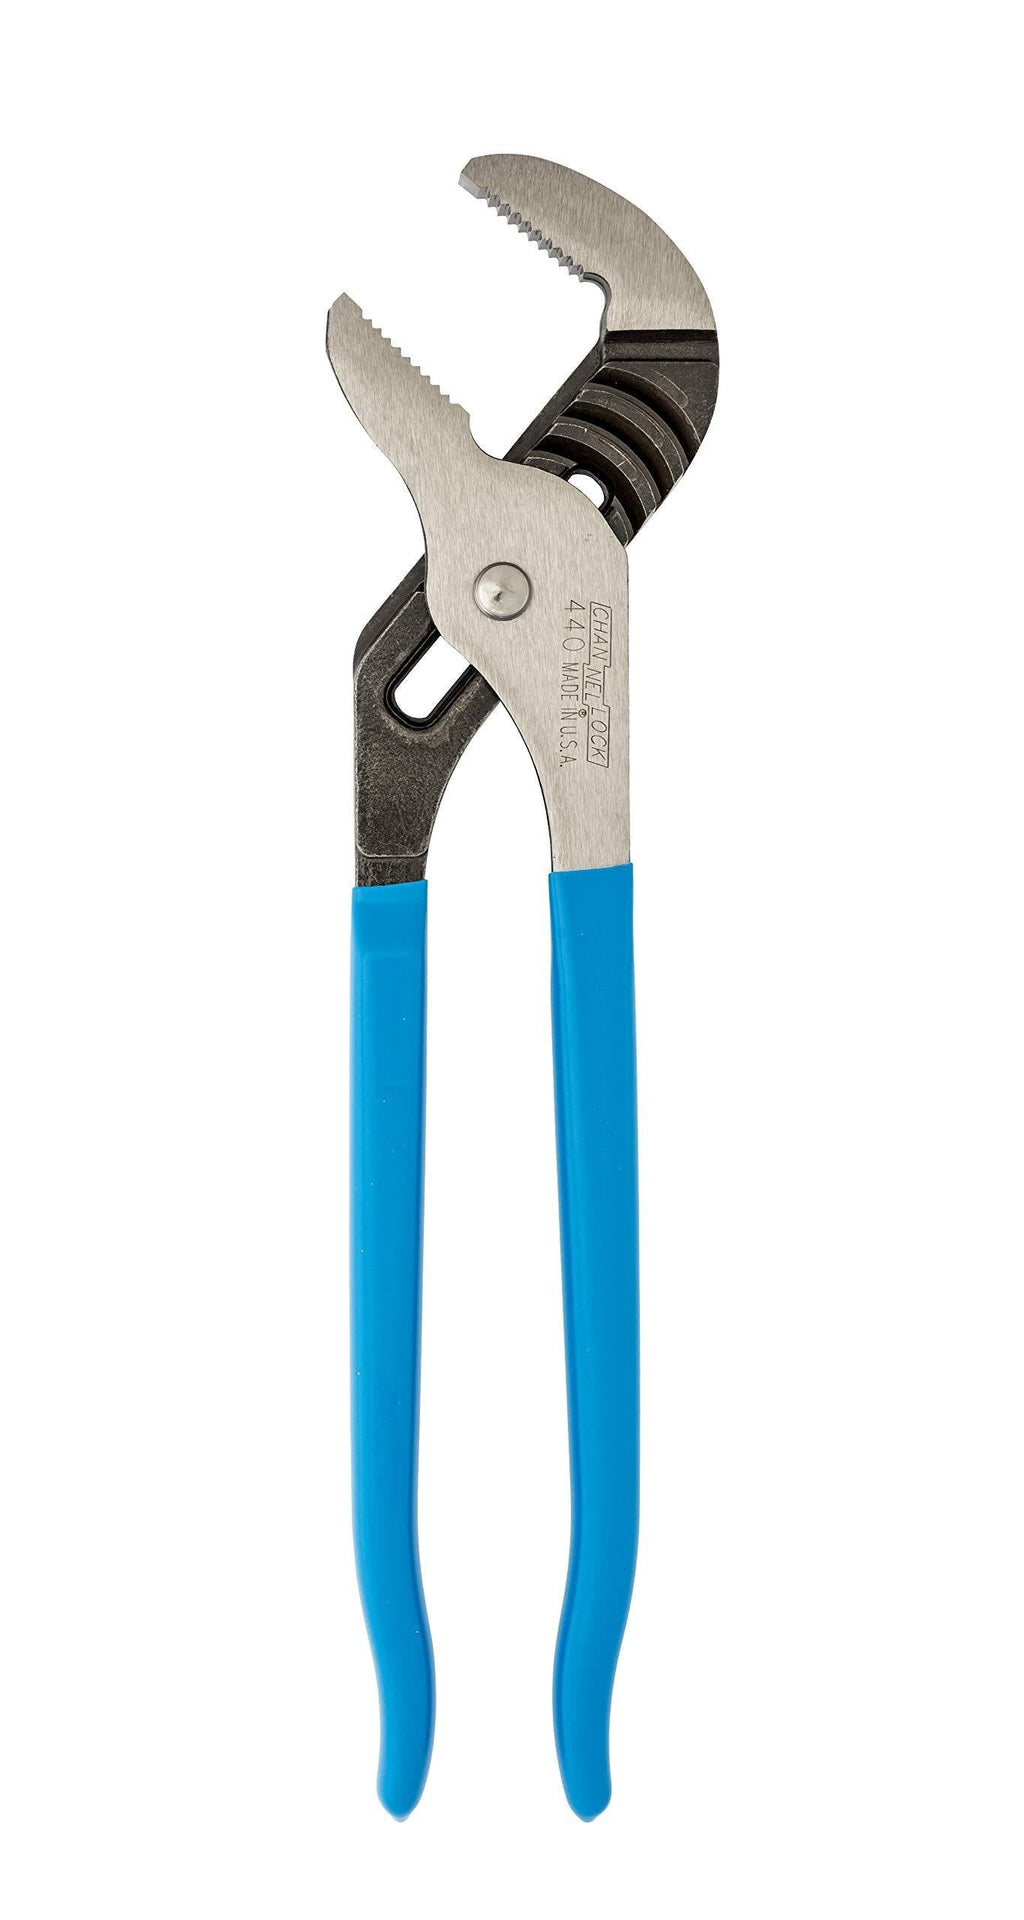  [AUSTRALIA] - Channellock 440 Tongue and Groove Pliers | 12-Inch Straight Jaw Groove Joint Plier with Comfort Grips | 2.25-Inch Jaw Capacity | Laser Heat-Treated 90° Teeth| Forged High Carbon Steel | Made in USA, Black, Blue, Silver